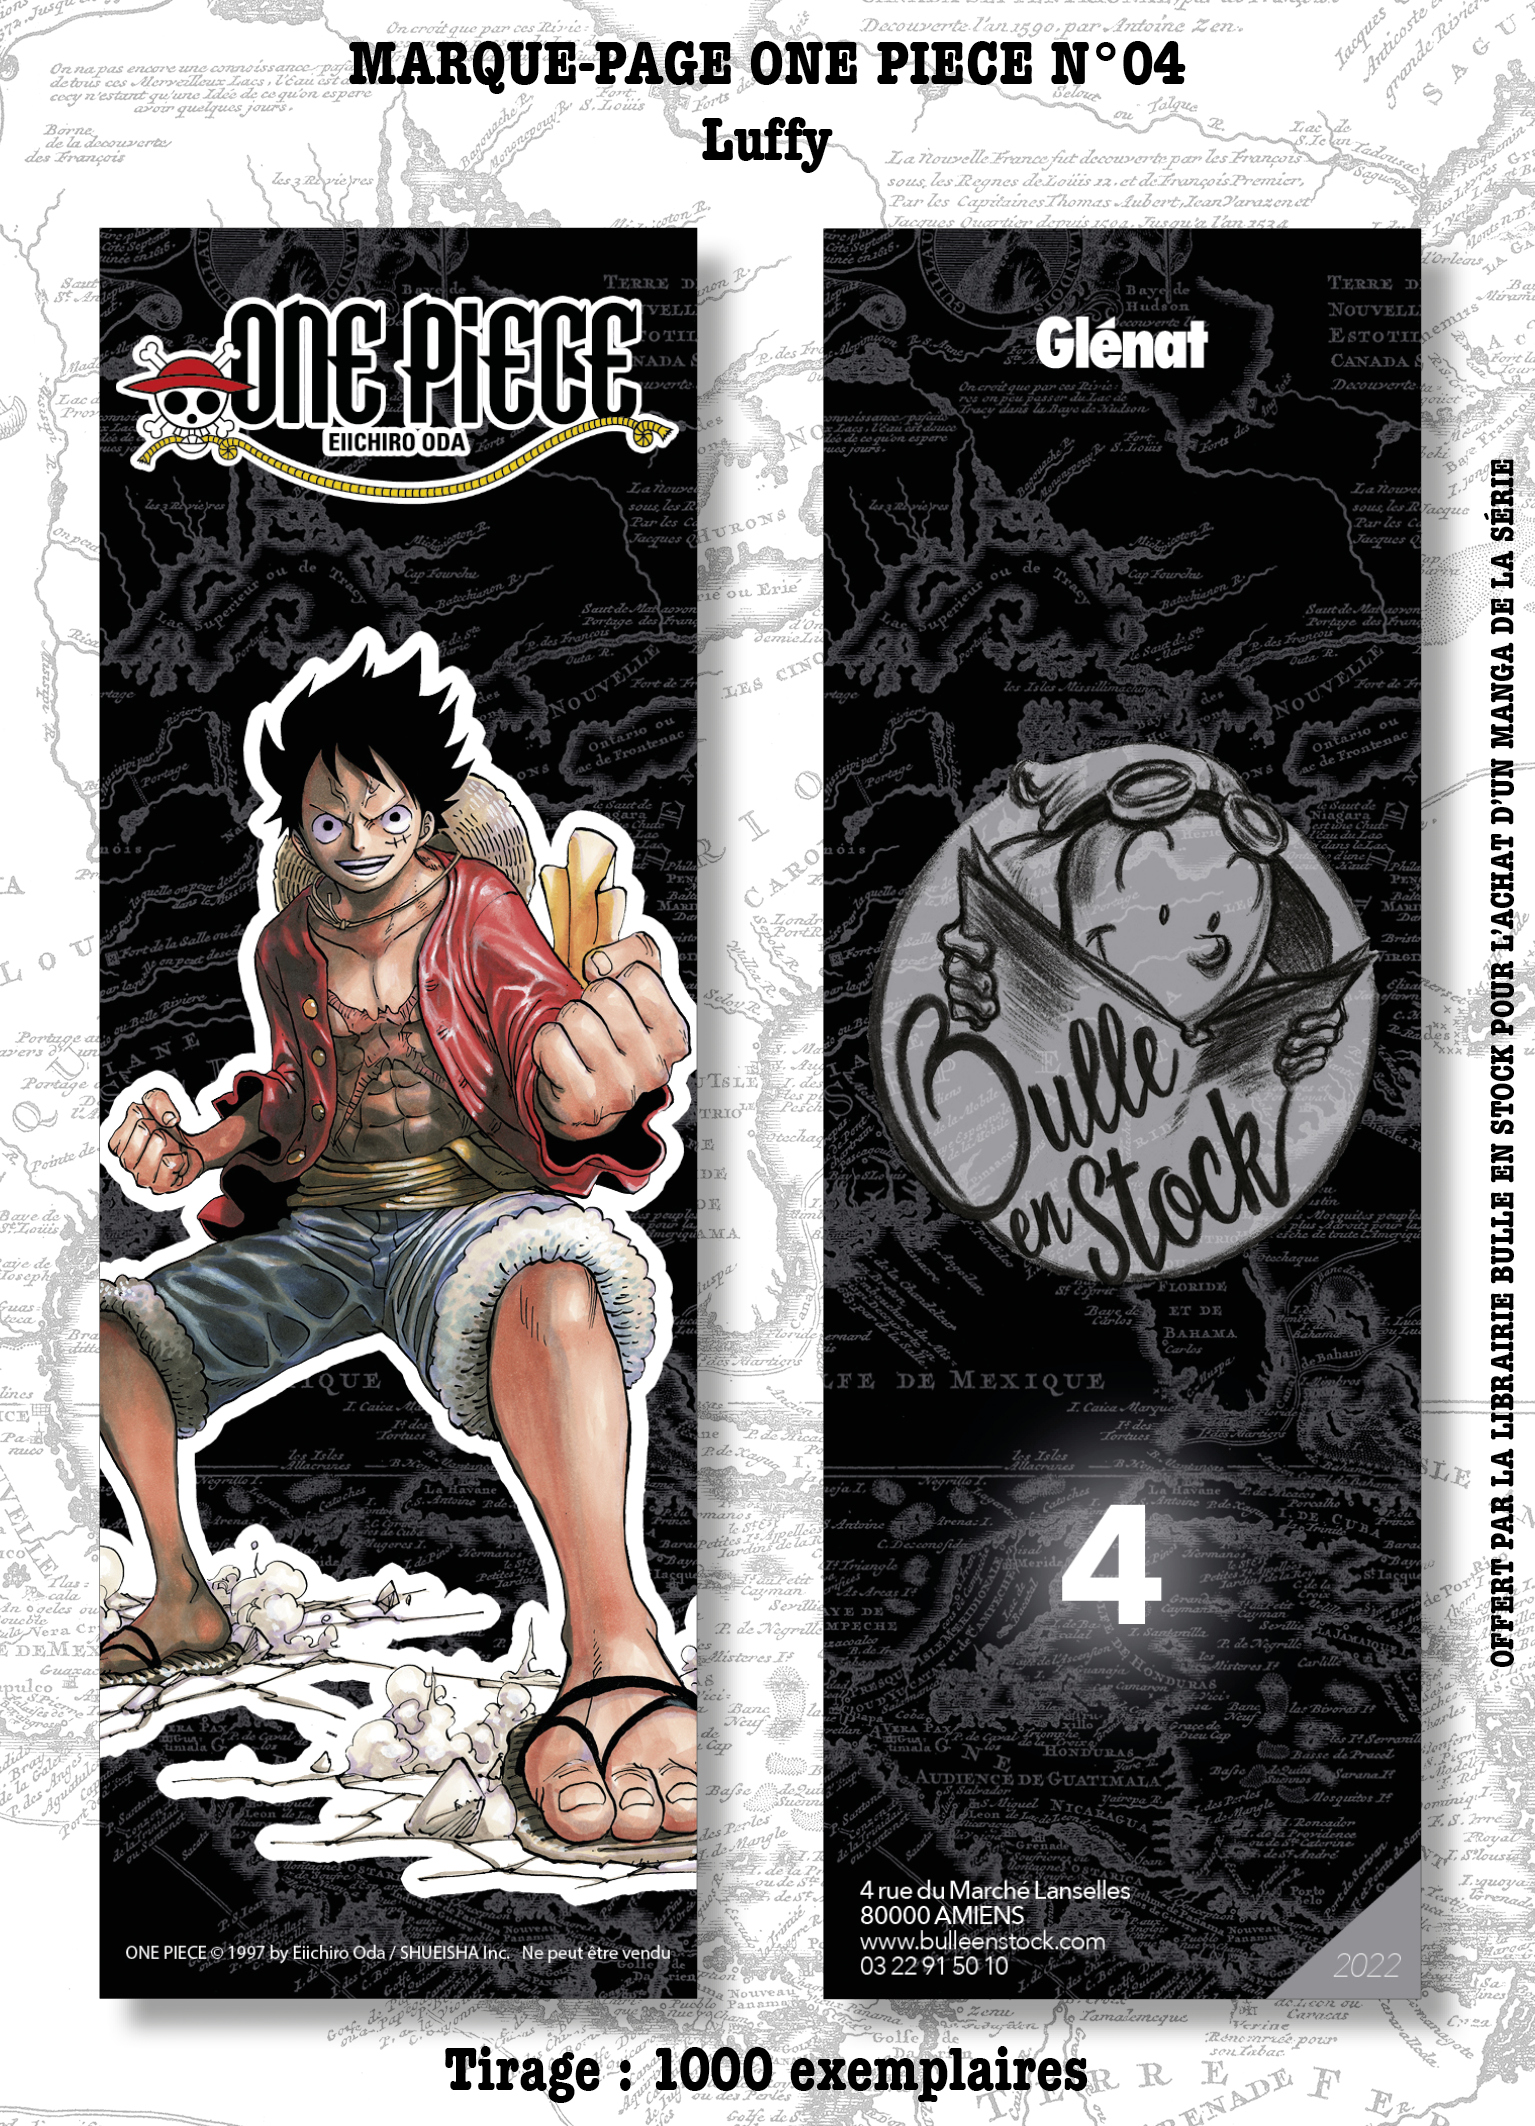 Marque-pages Manga Luxe Bulle en Stock 4 Luffy One piece (Bulle en